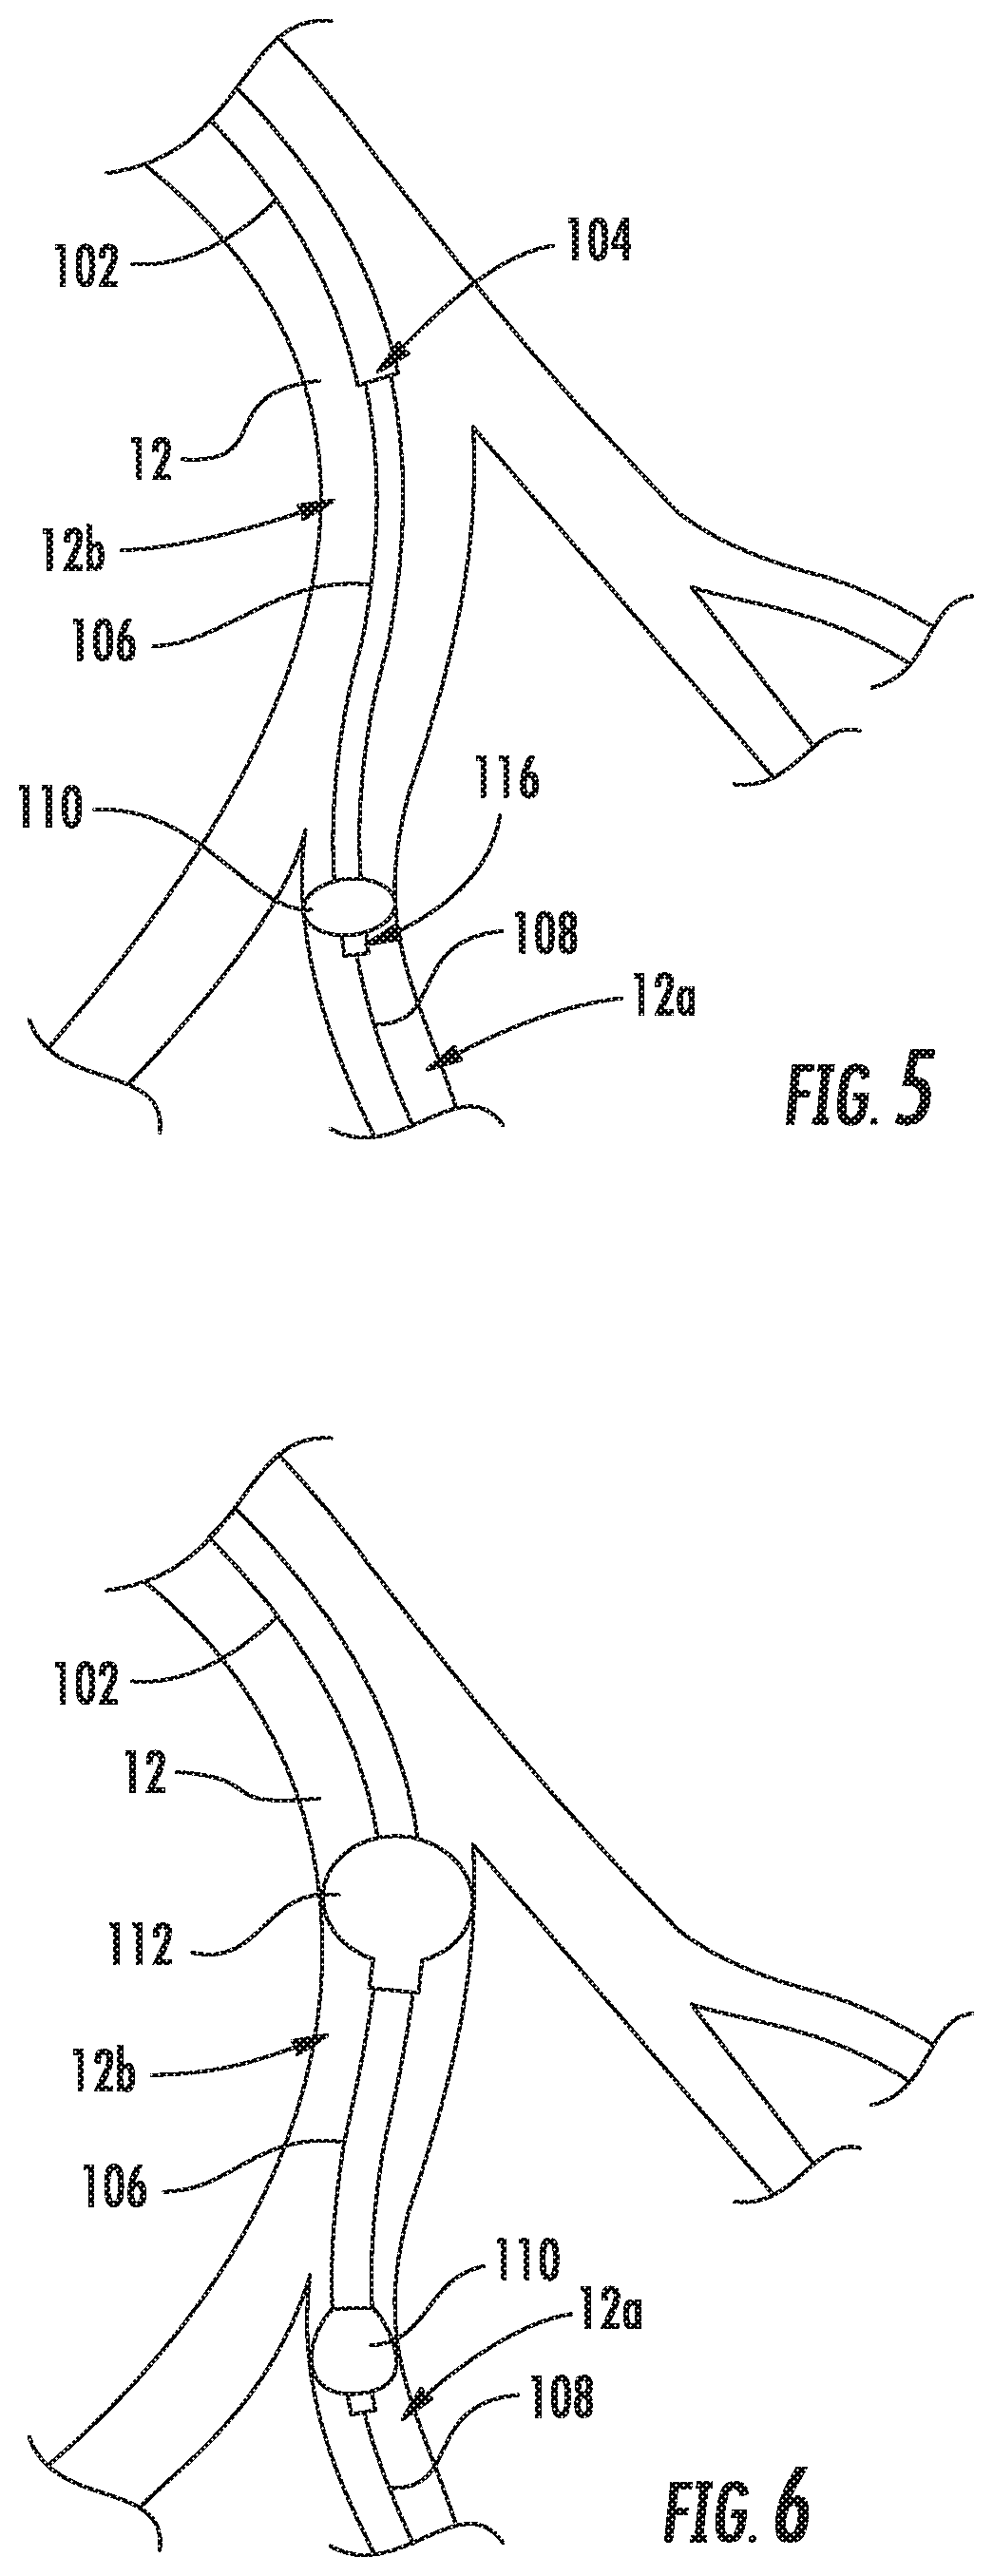 Systems and methods for delivering an implantable device